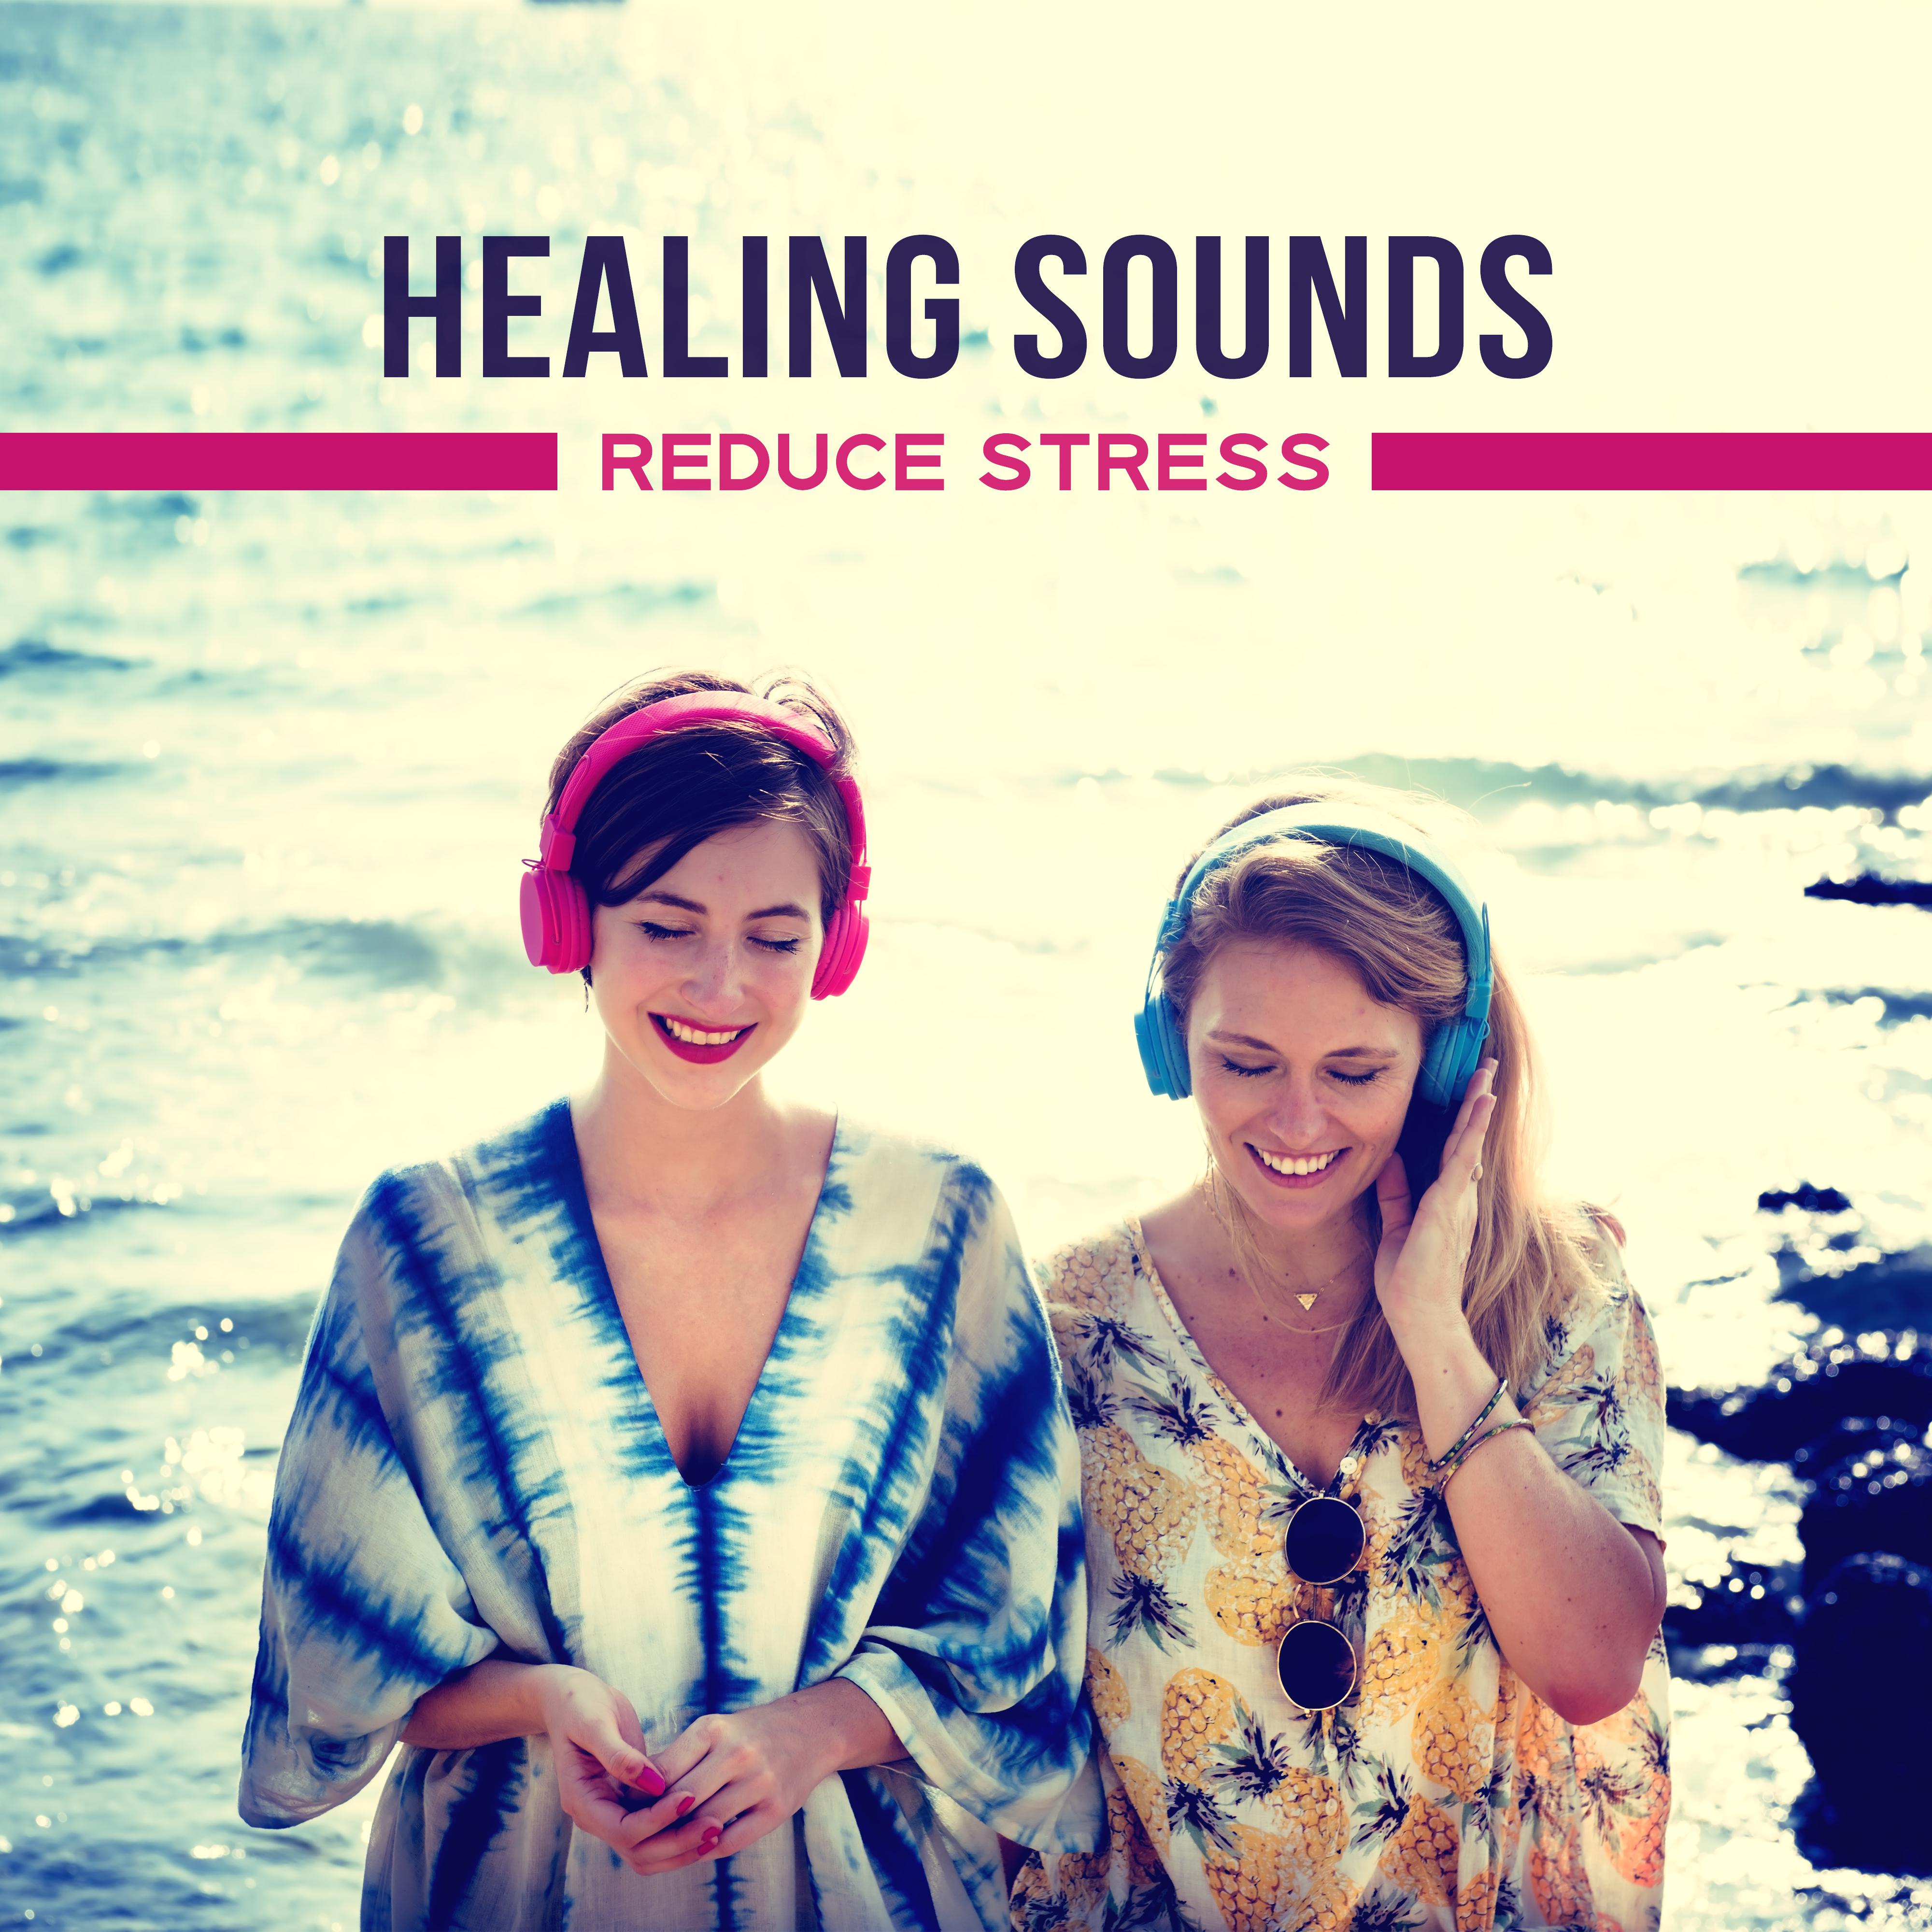 Healing Sounds Reduce Stress  Music to Calm Down, Relaxing Therapy, Harmony, Peaceful Mind, New Age Music to Rest, Chillout, Zen